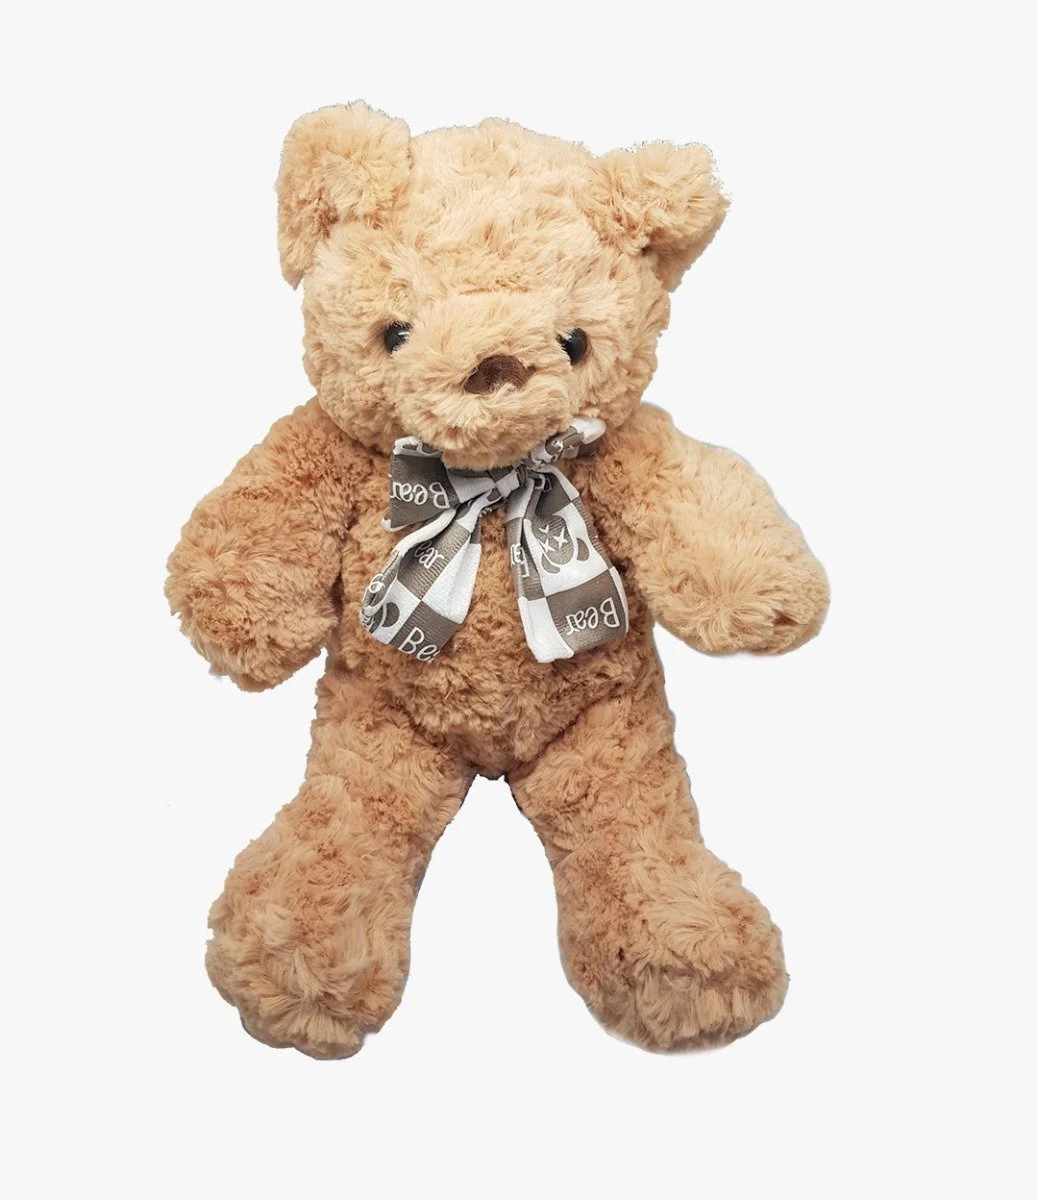 Teddy Bear Ali with Ribbon by Gifted